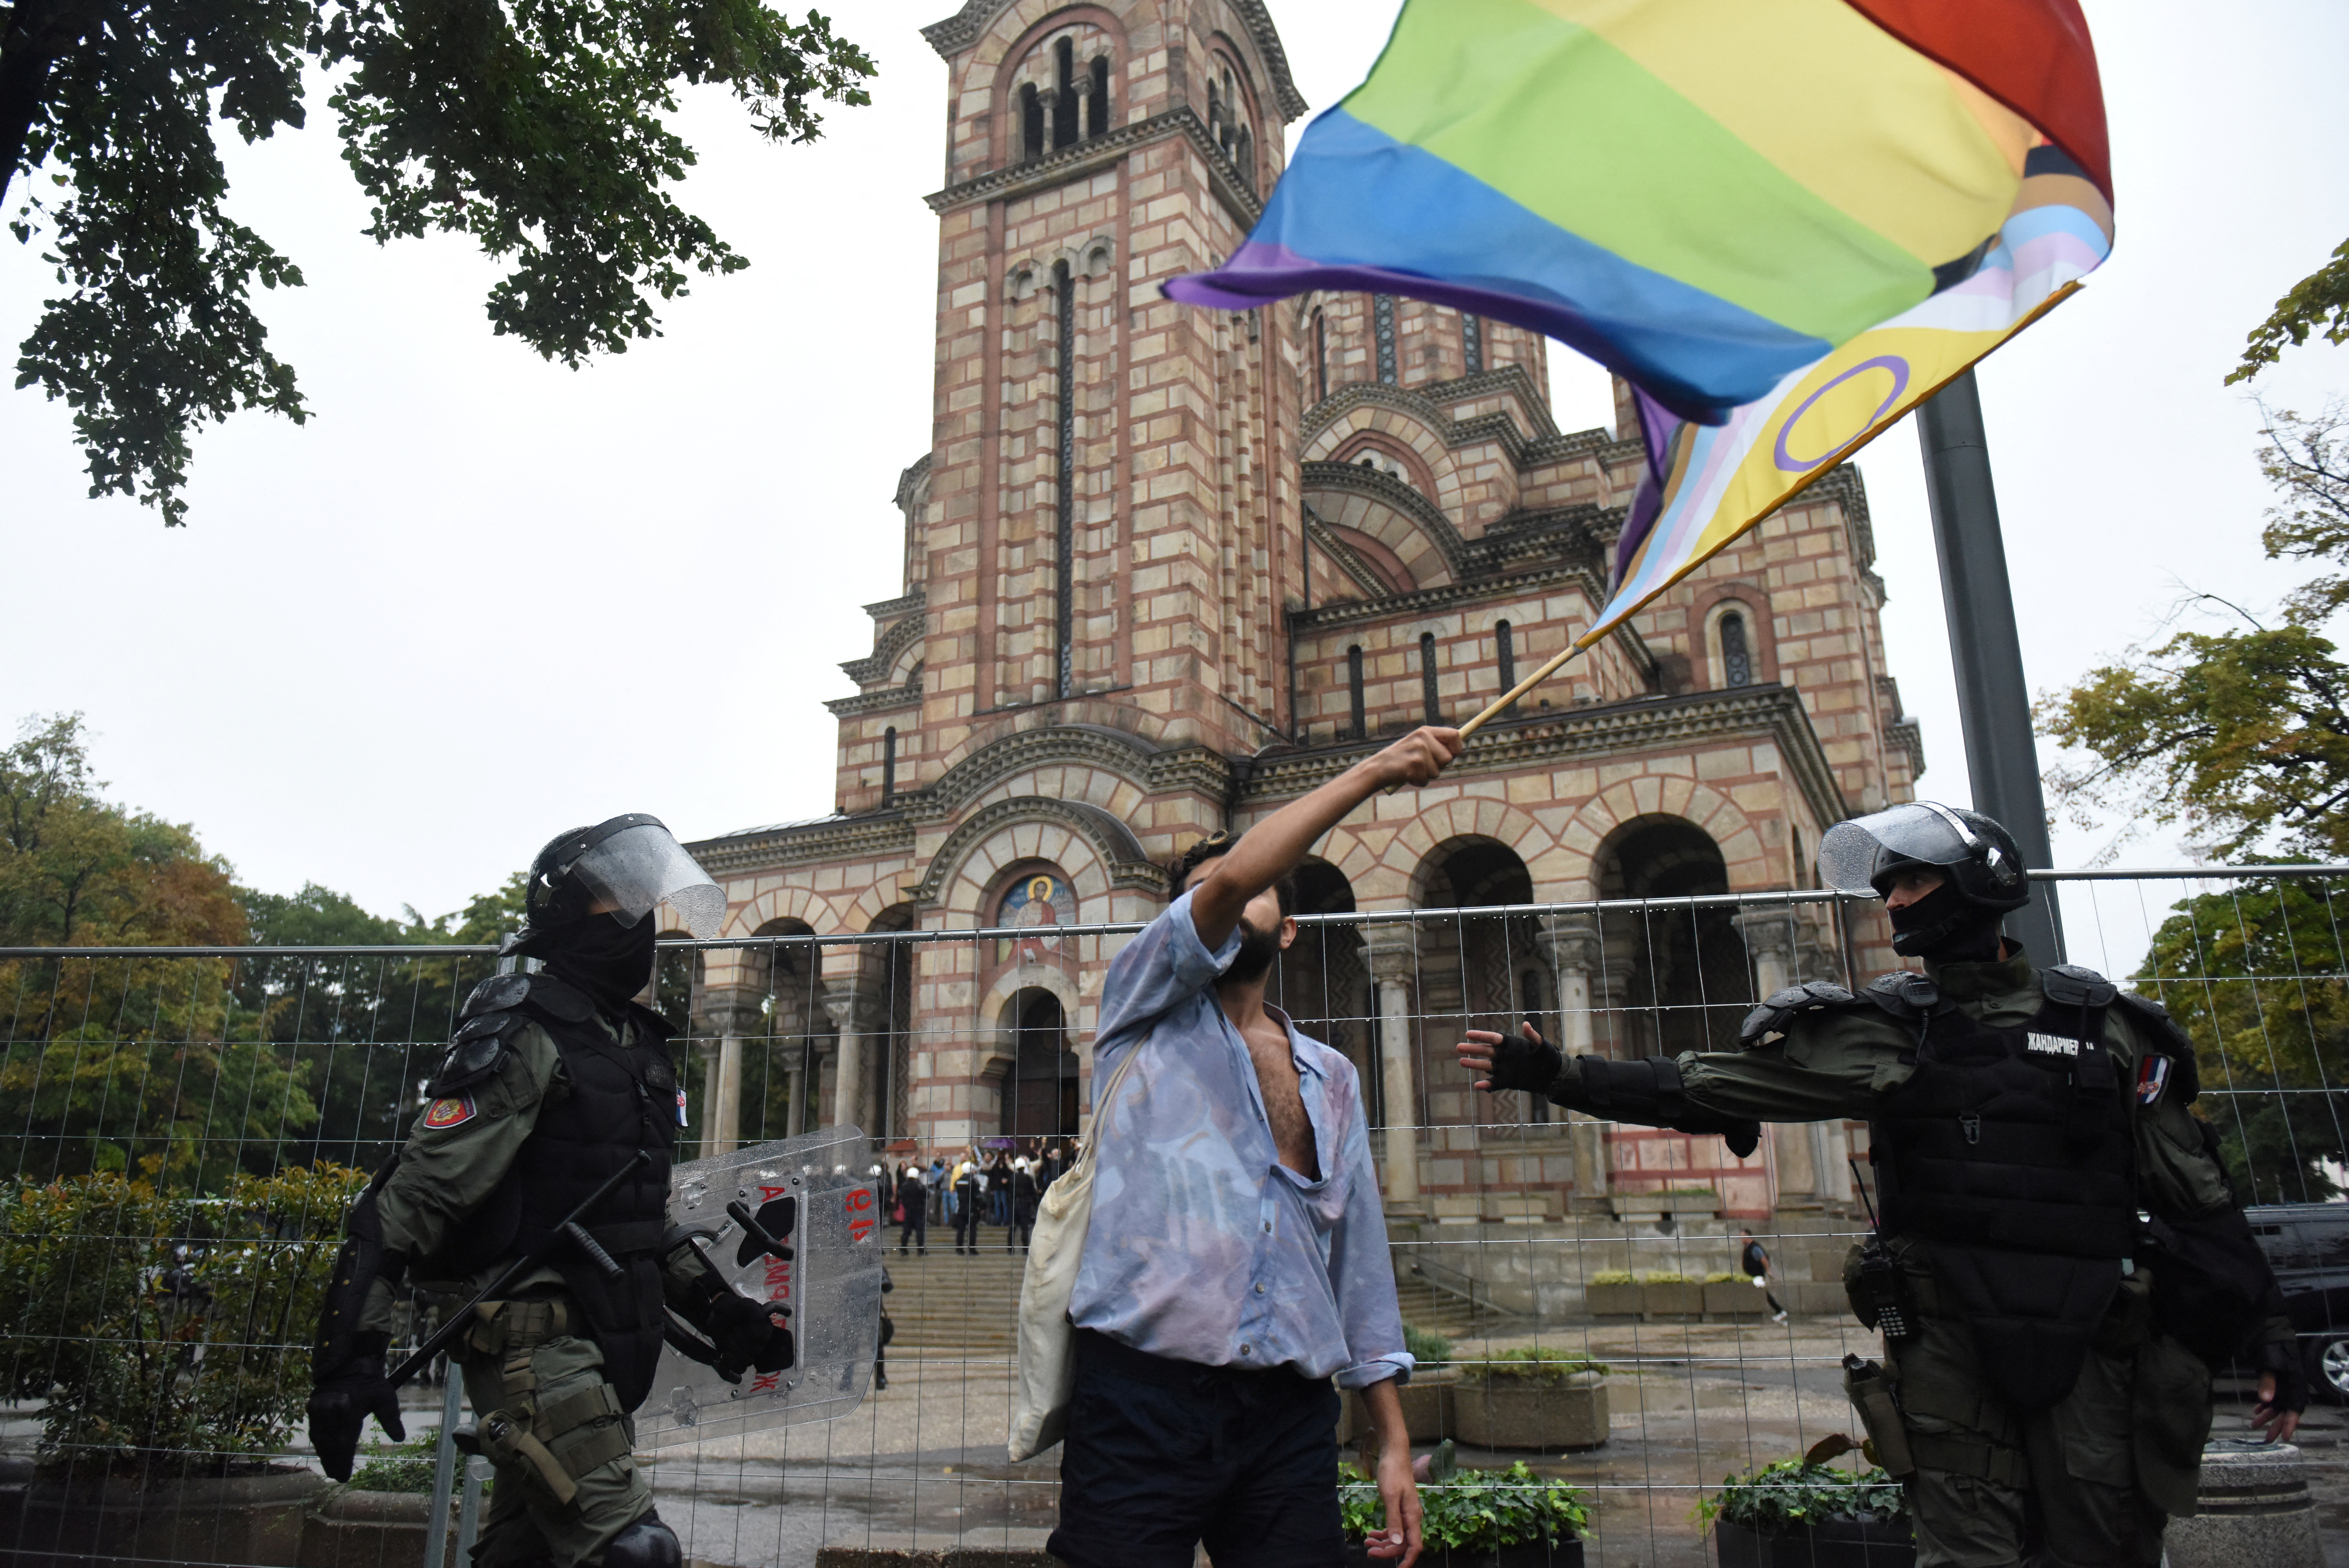 A person waves a flag during the European LGBTQ pride march in Belgrade, Serbia, September 17, 2022. 